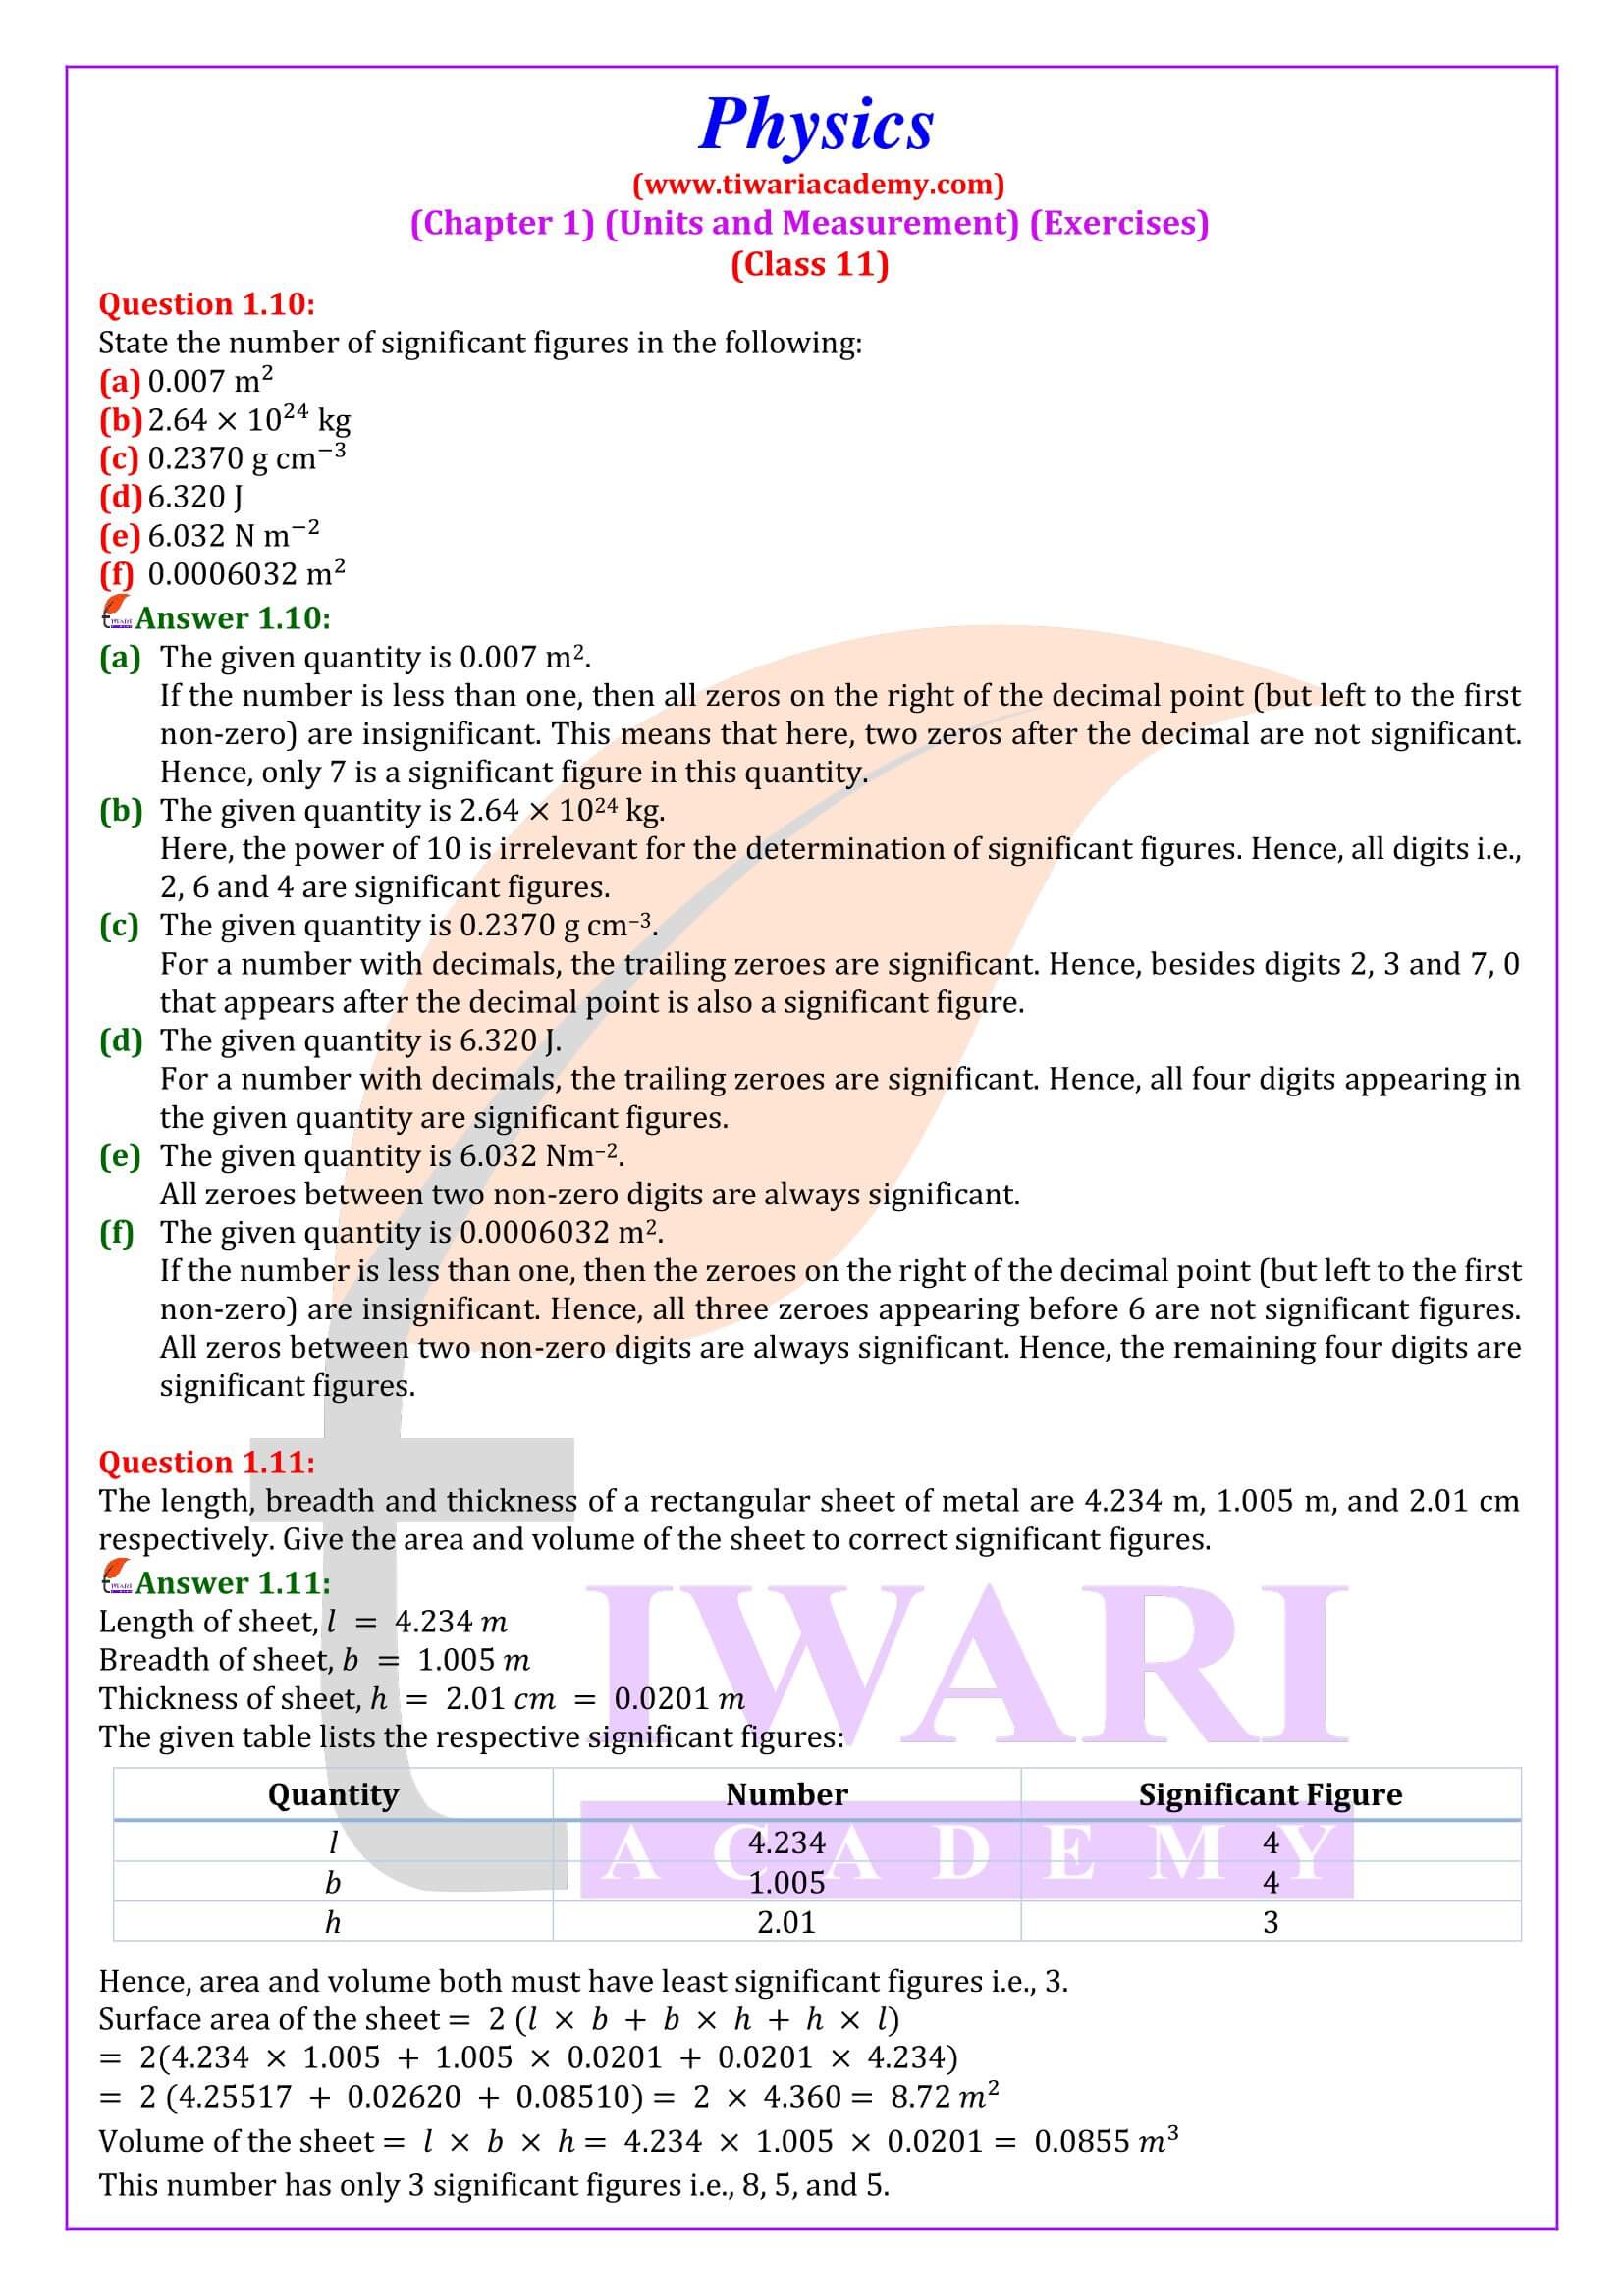 NCERT Solutions for Class 11 Physics Chapter 1 guide